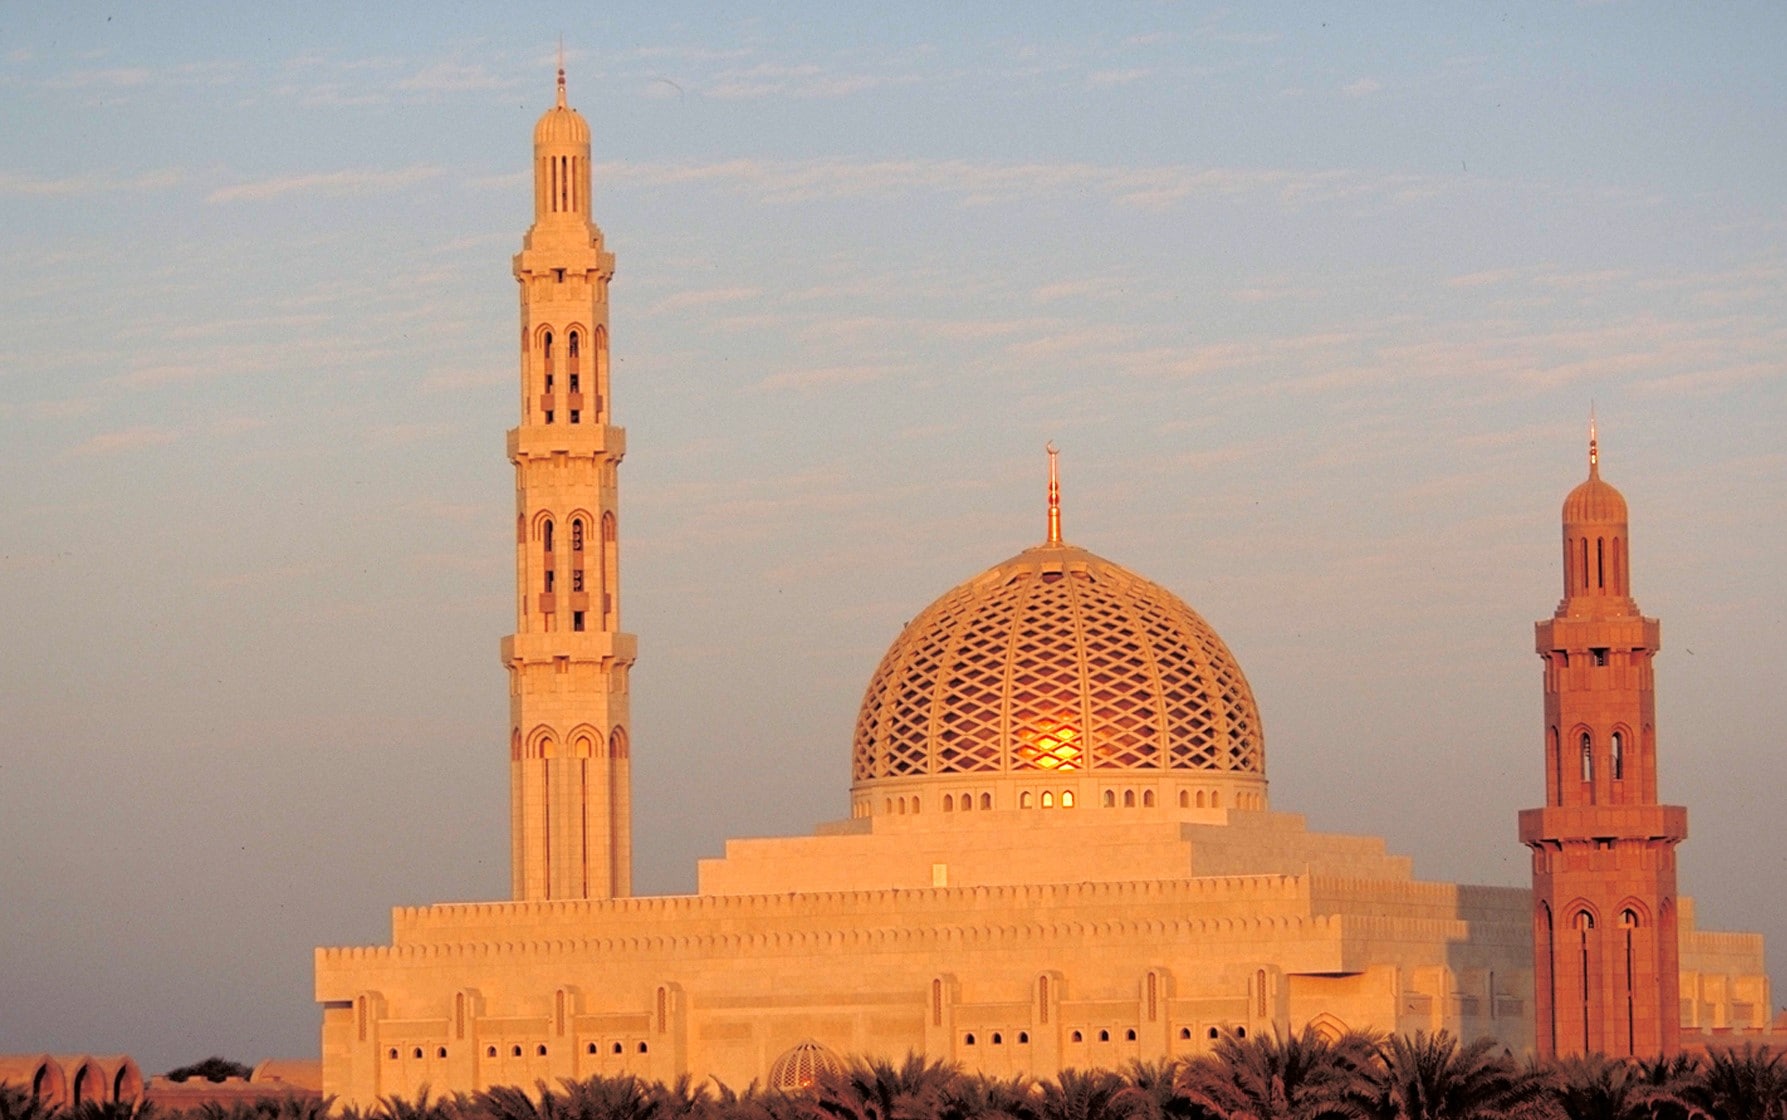 Exterior views of the Sultan Qaboos Grand Mosque during sunset, Bawshar, Oman